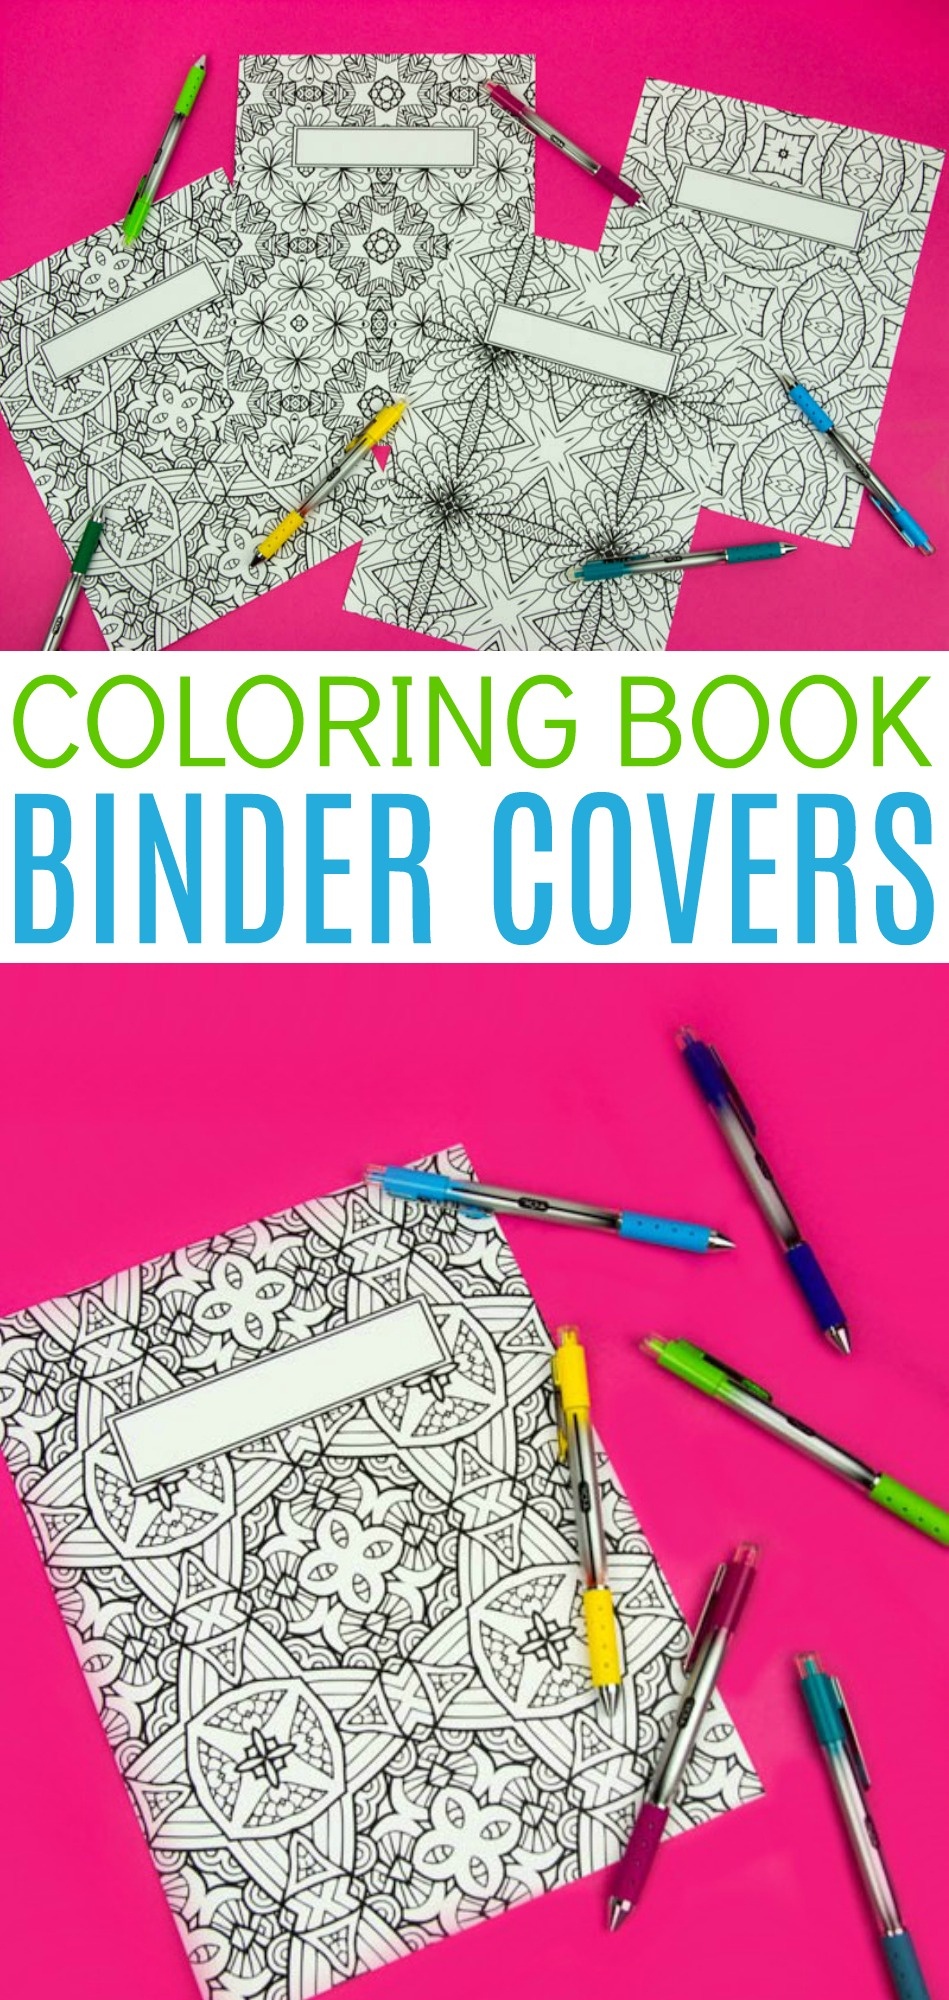 Coloring Book Binder Covers- Free Printable - A Little Craft In Your Day - Free Printable Binder Covers To Color